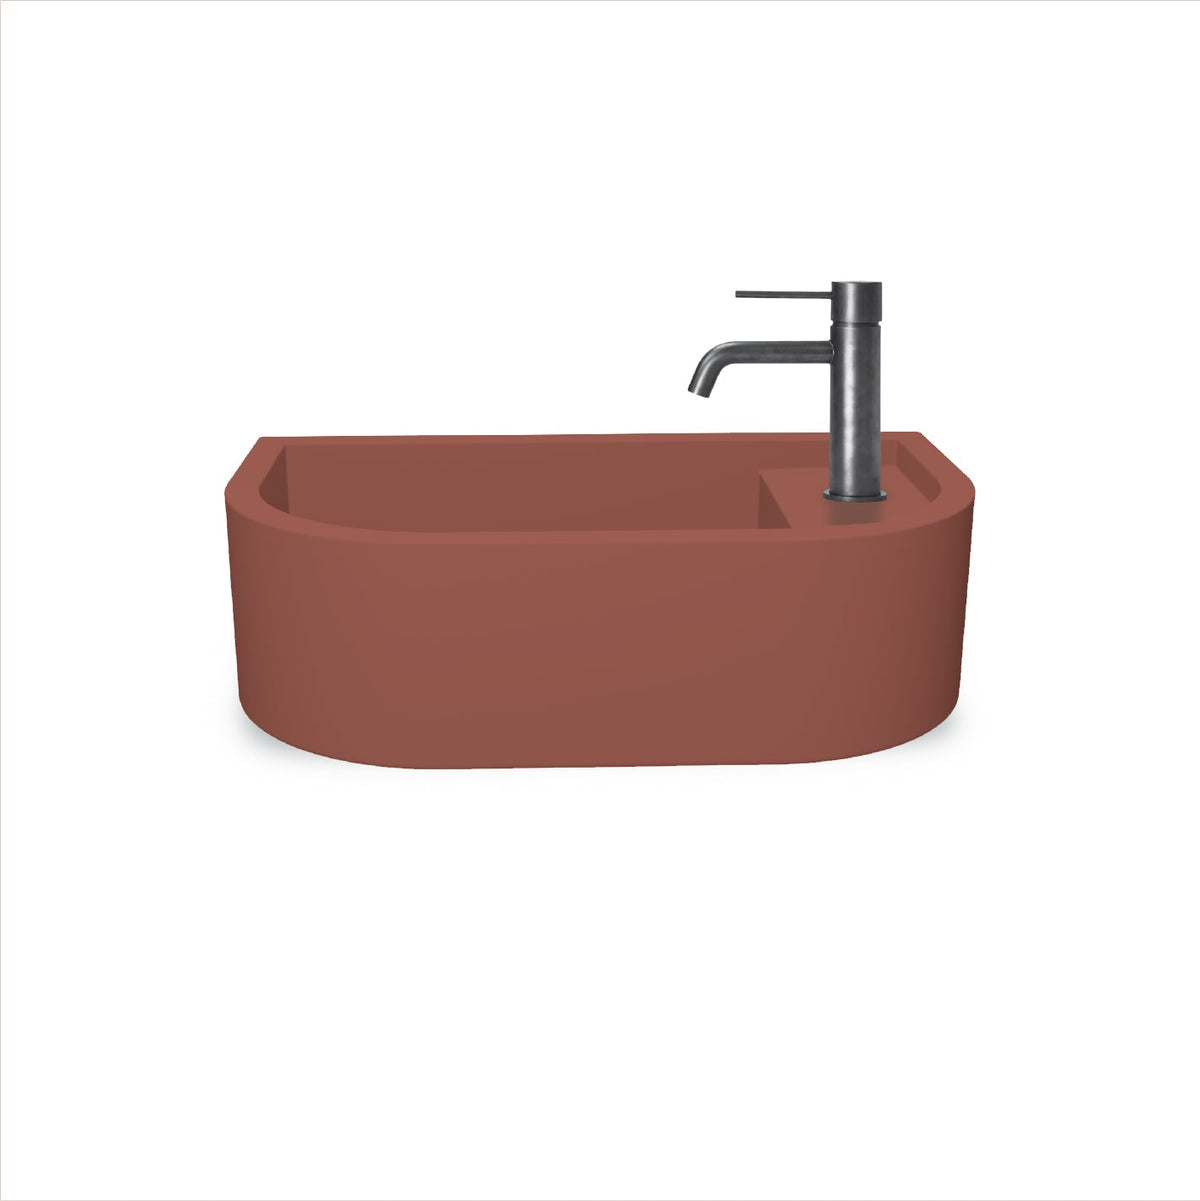 Loop 01 Basin - Overflow - Wall Hung (Musk,Tap Hole,Brass)